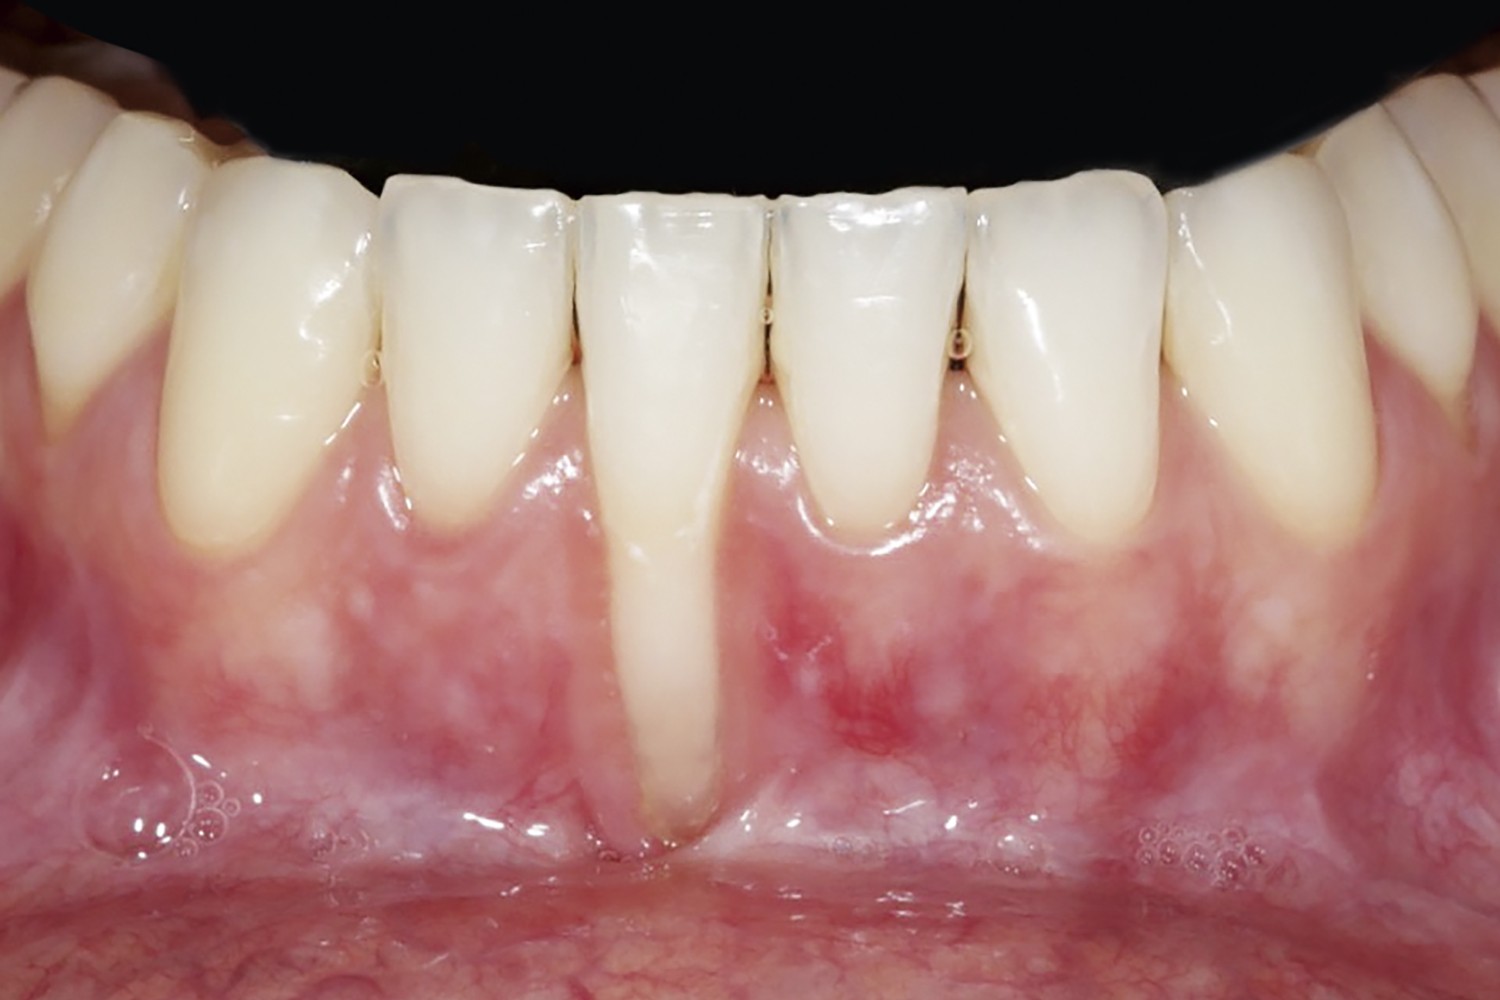 Connective tissue graft for root coverage in anterior mandible using a tunneling technique: Case rep